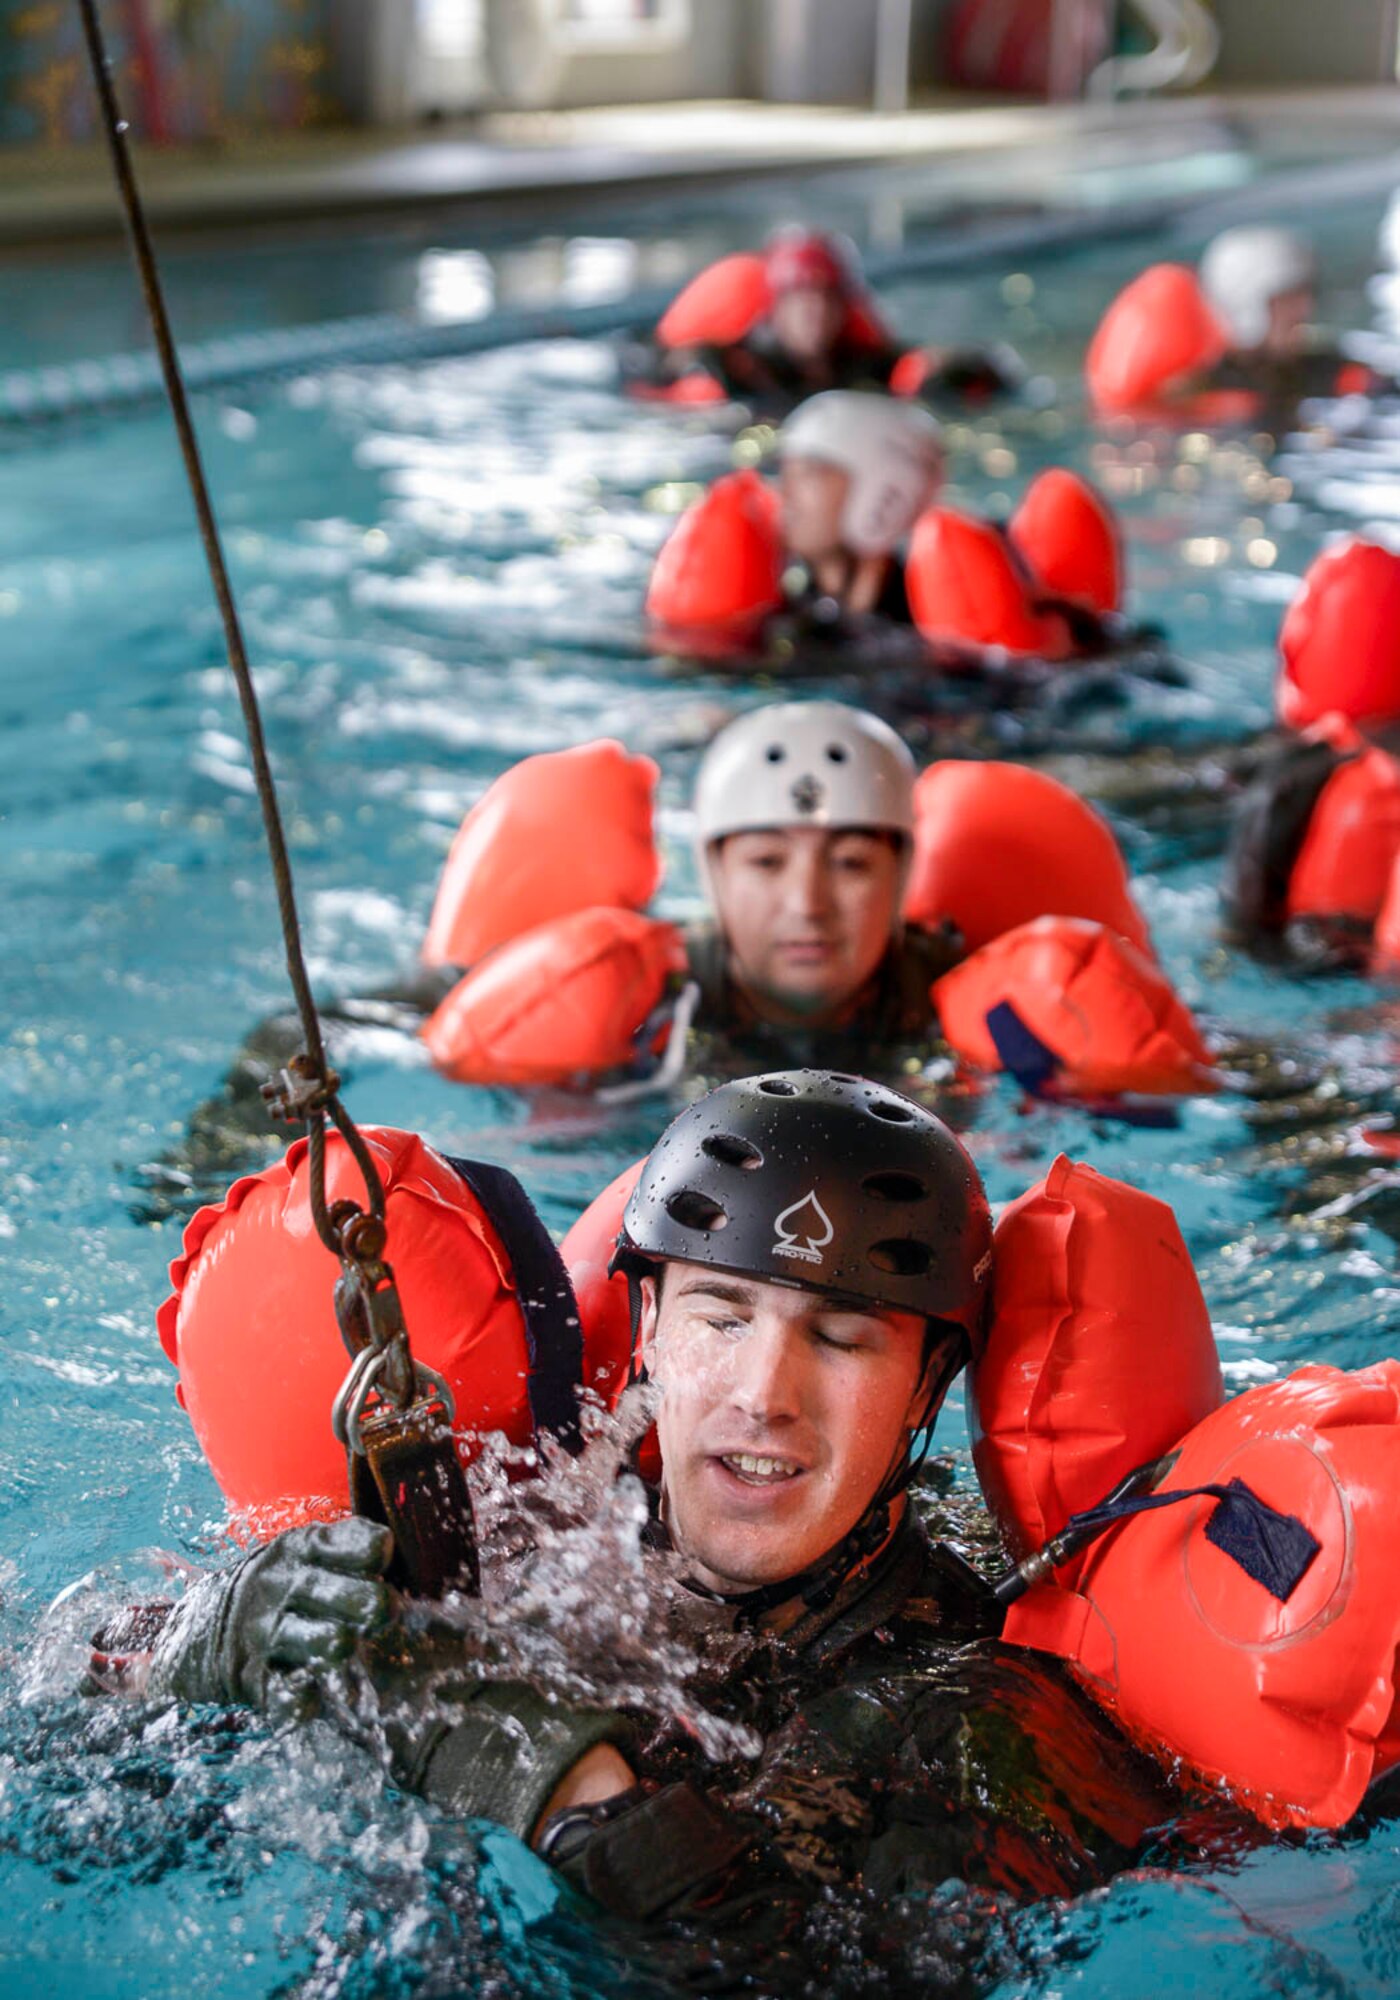 Team Little Rock aircrew members participated in Water Survival training taught by Survival, Evasion, Resistance and Escape instructors April 6, 2019, at the Jacksonville Community Center, Jacksonville, Arkansas